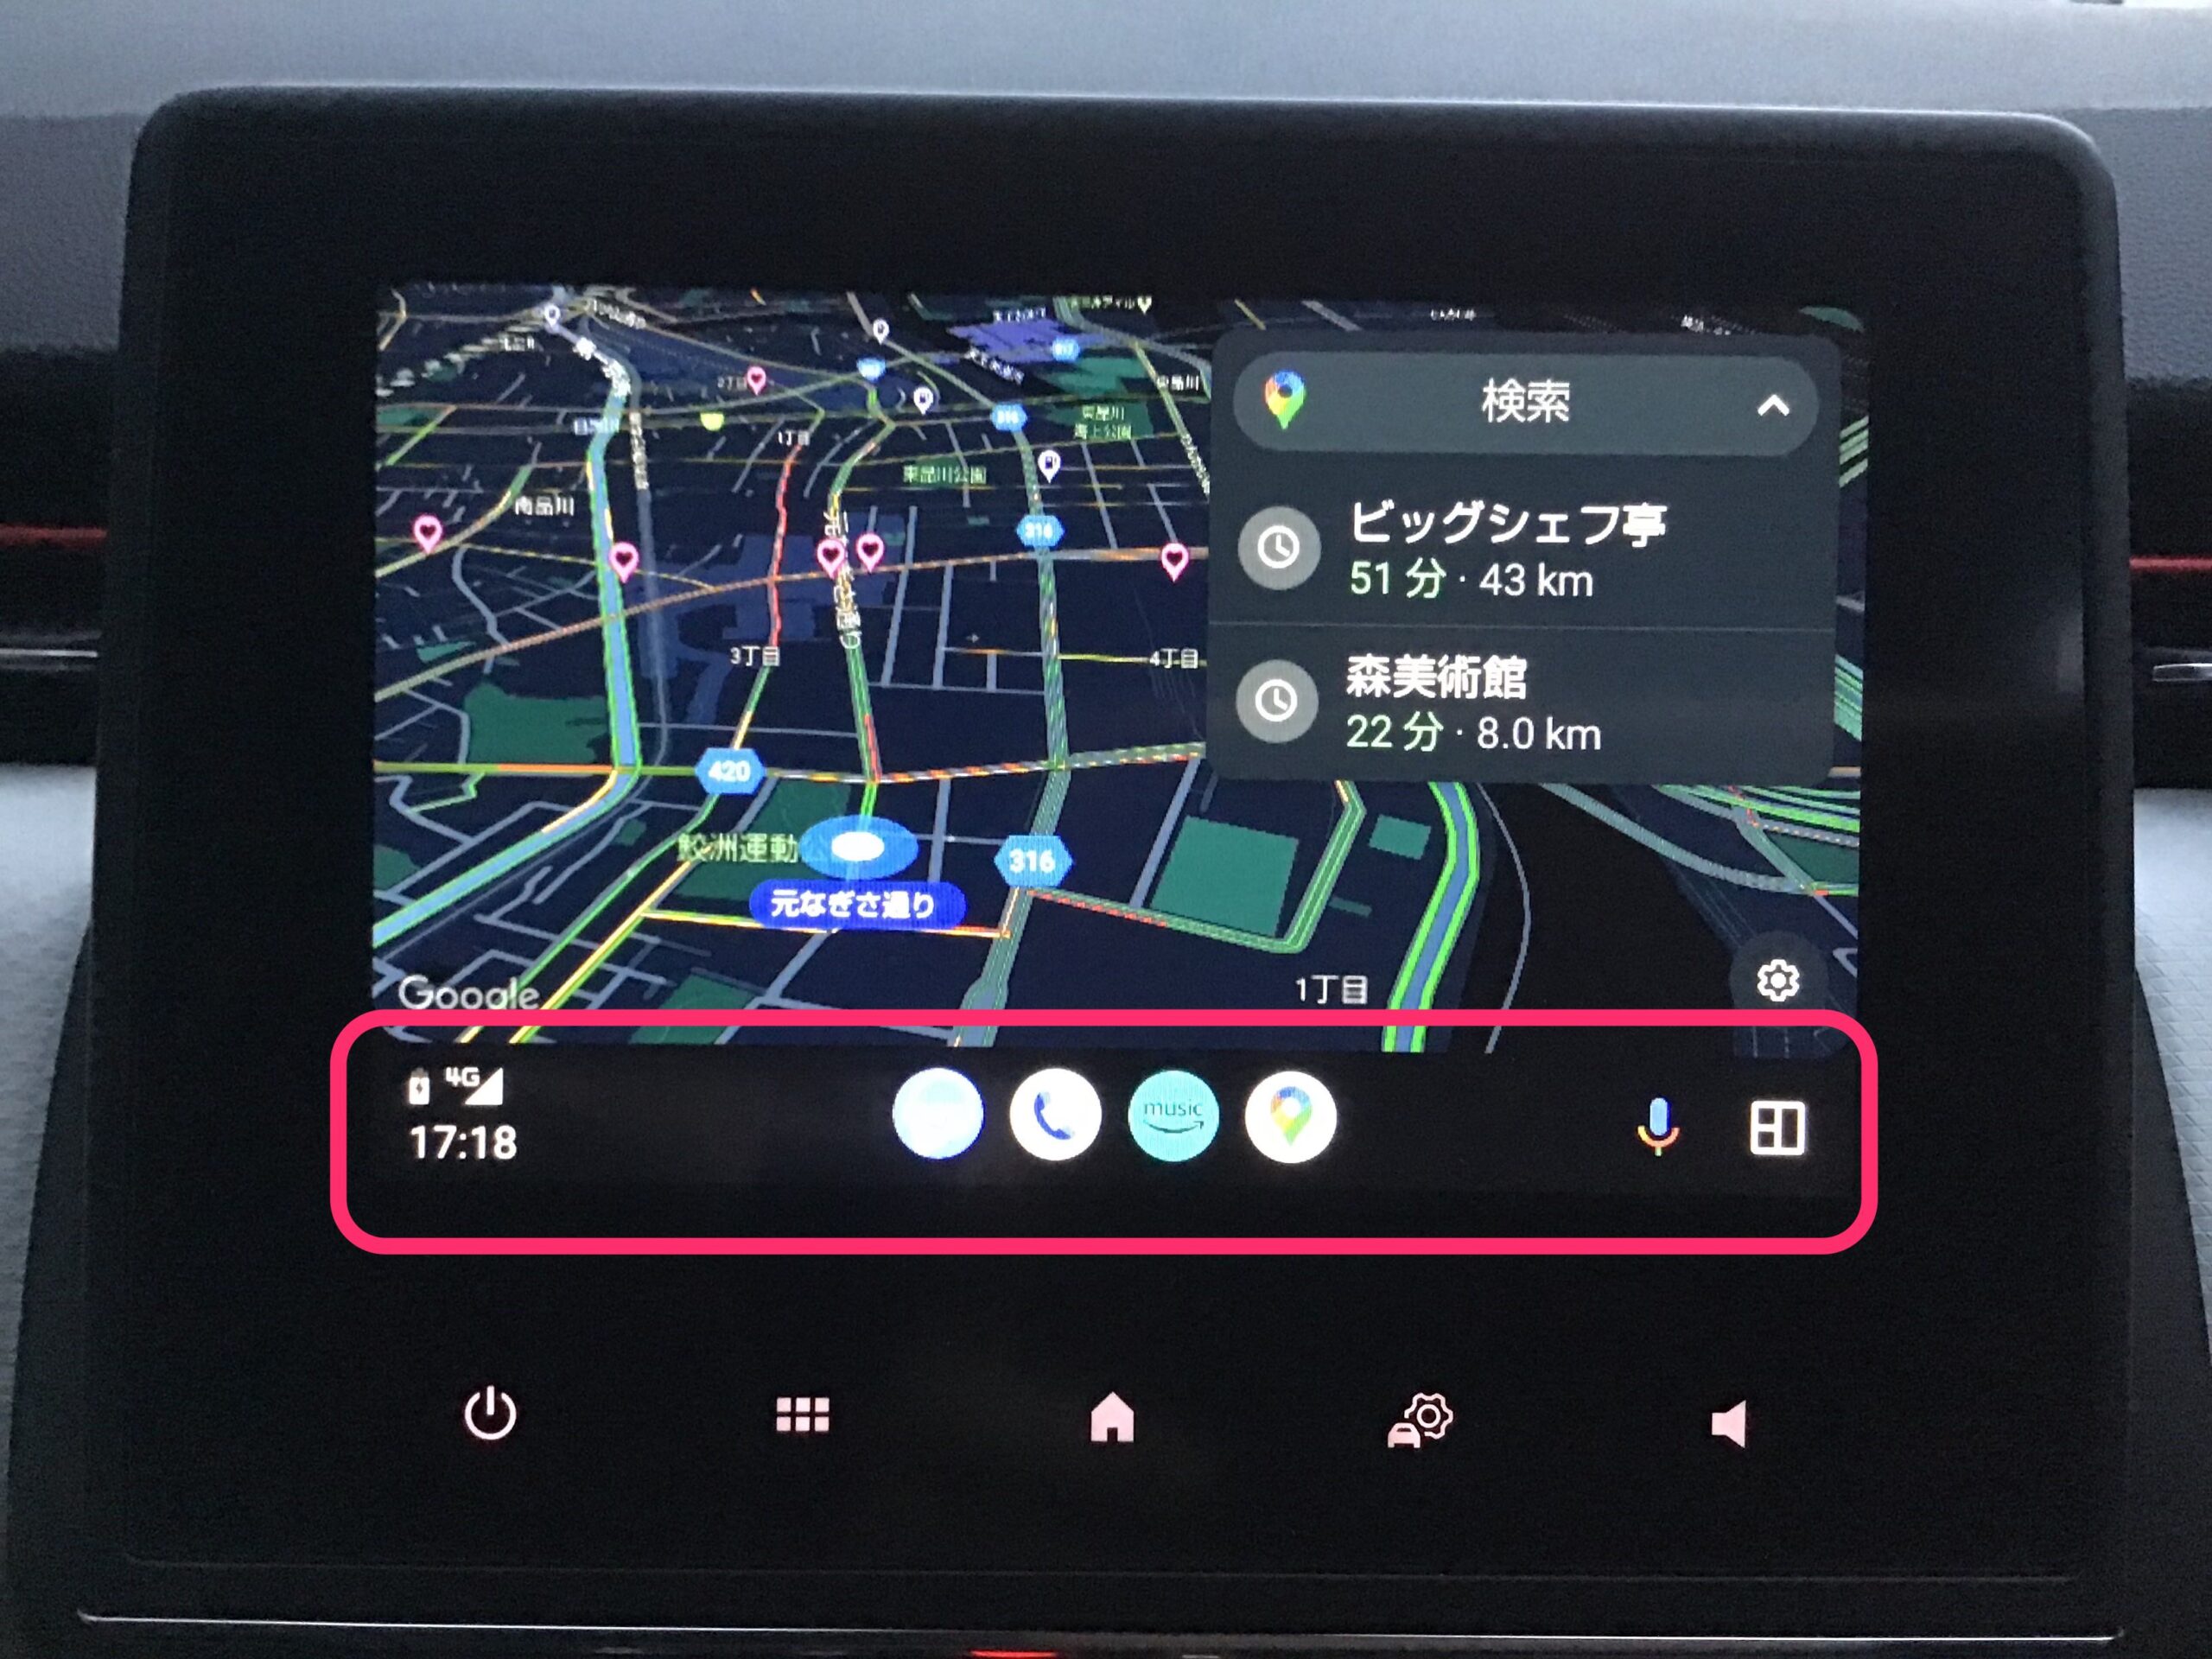 Android Auto　インターフェース　画面下